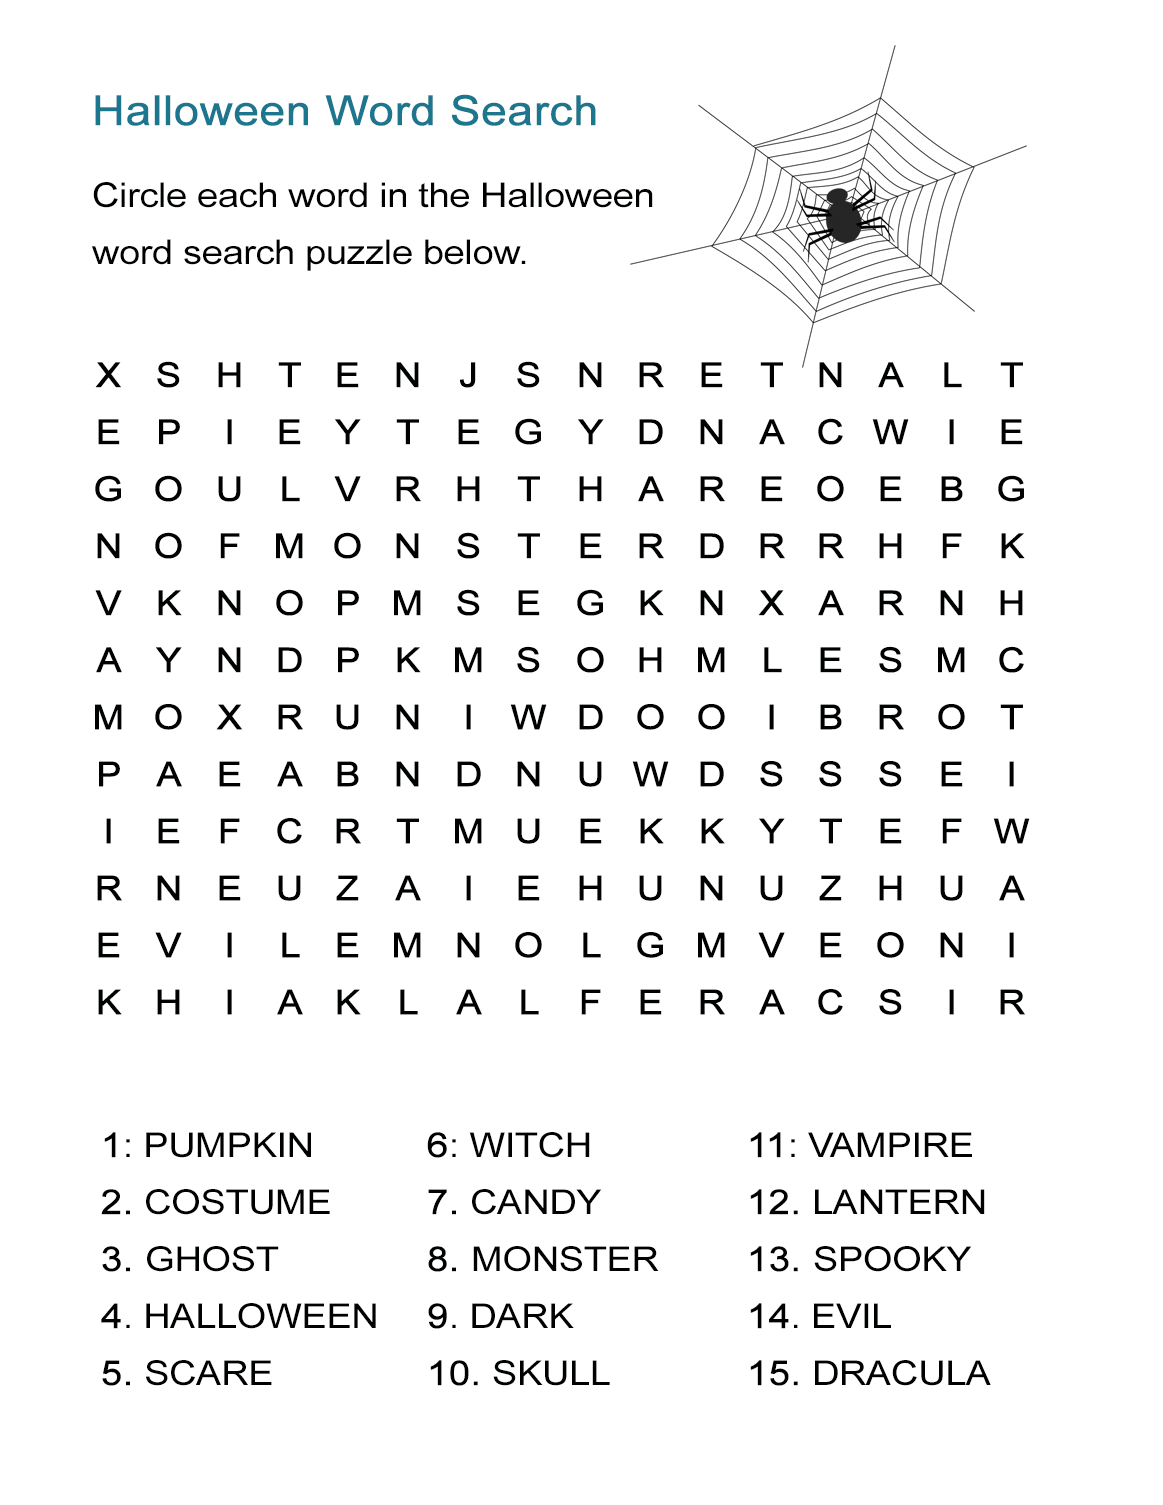 Halloween Word Search Puzzle: Find The Halloween Vocabulary In This - Free Printable Word Search Puzzles For Adults